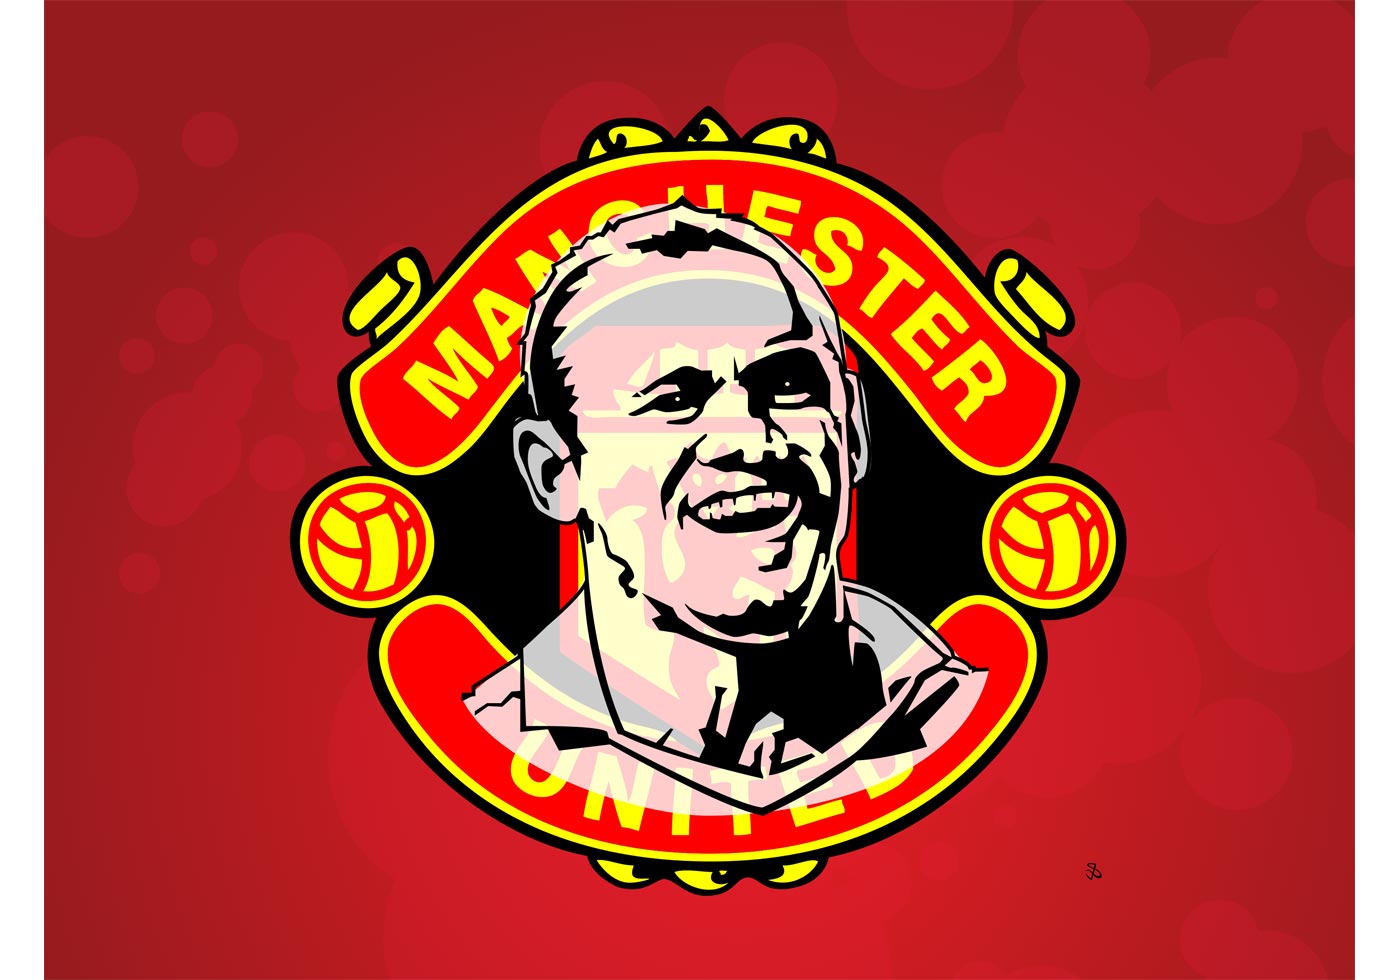 Manchester United Graphics 67130 - Download Free Vectors, Clipart